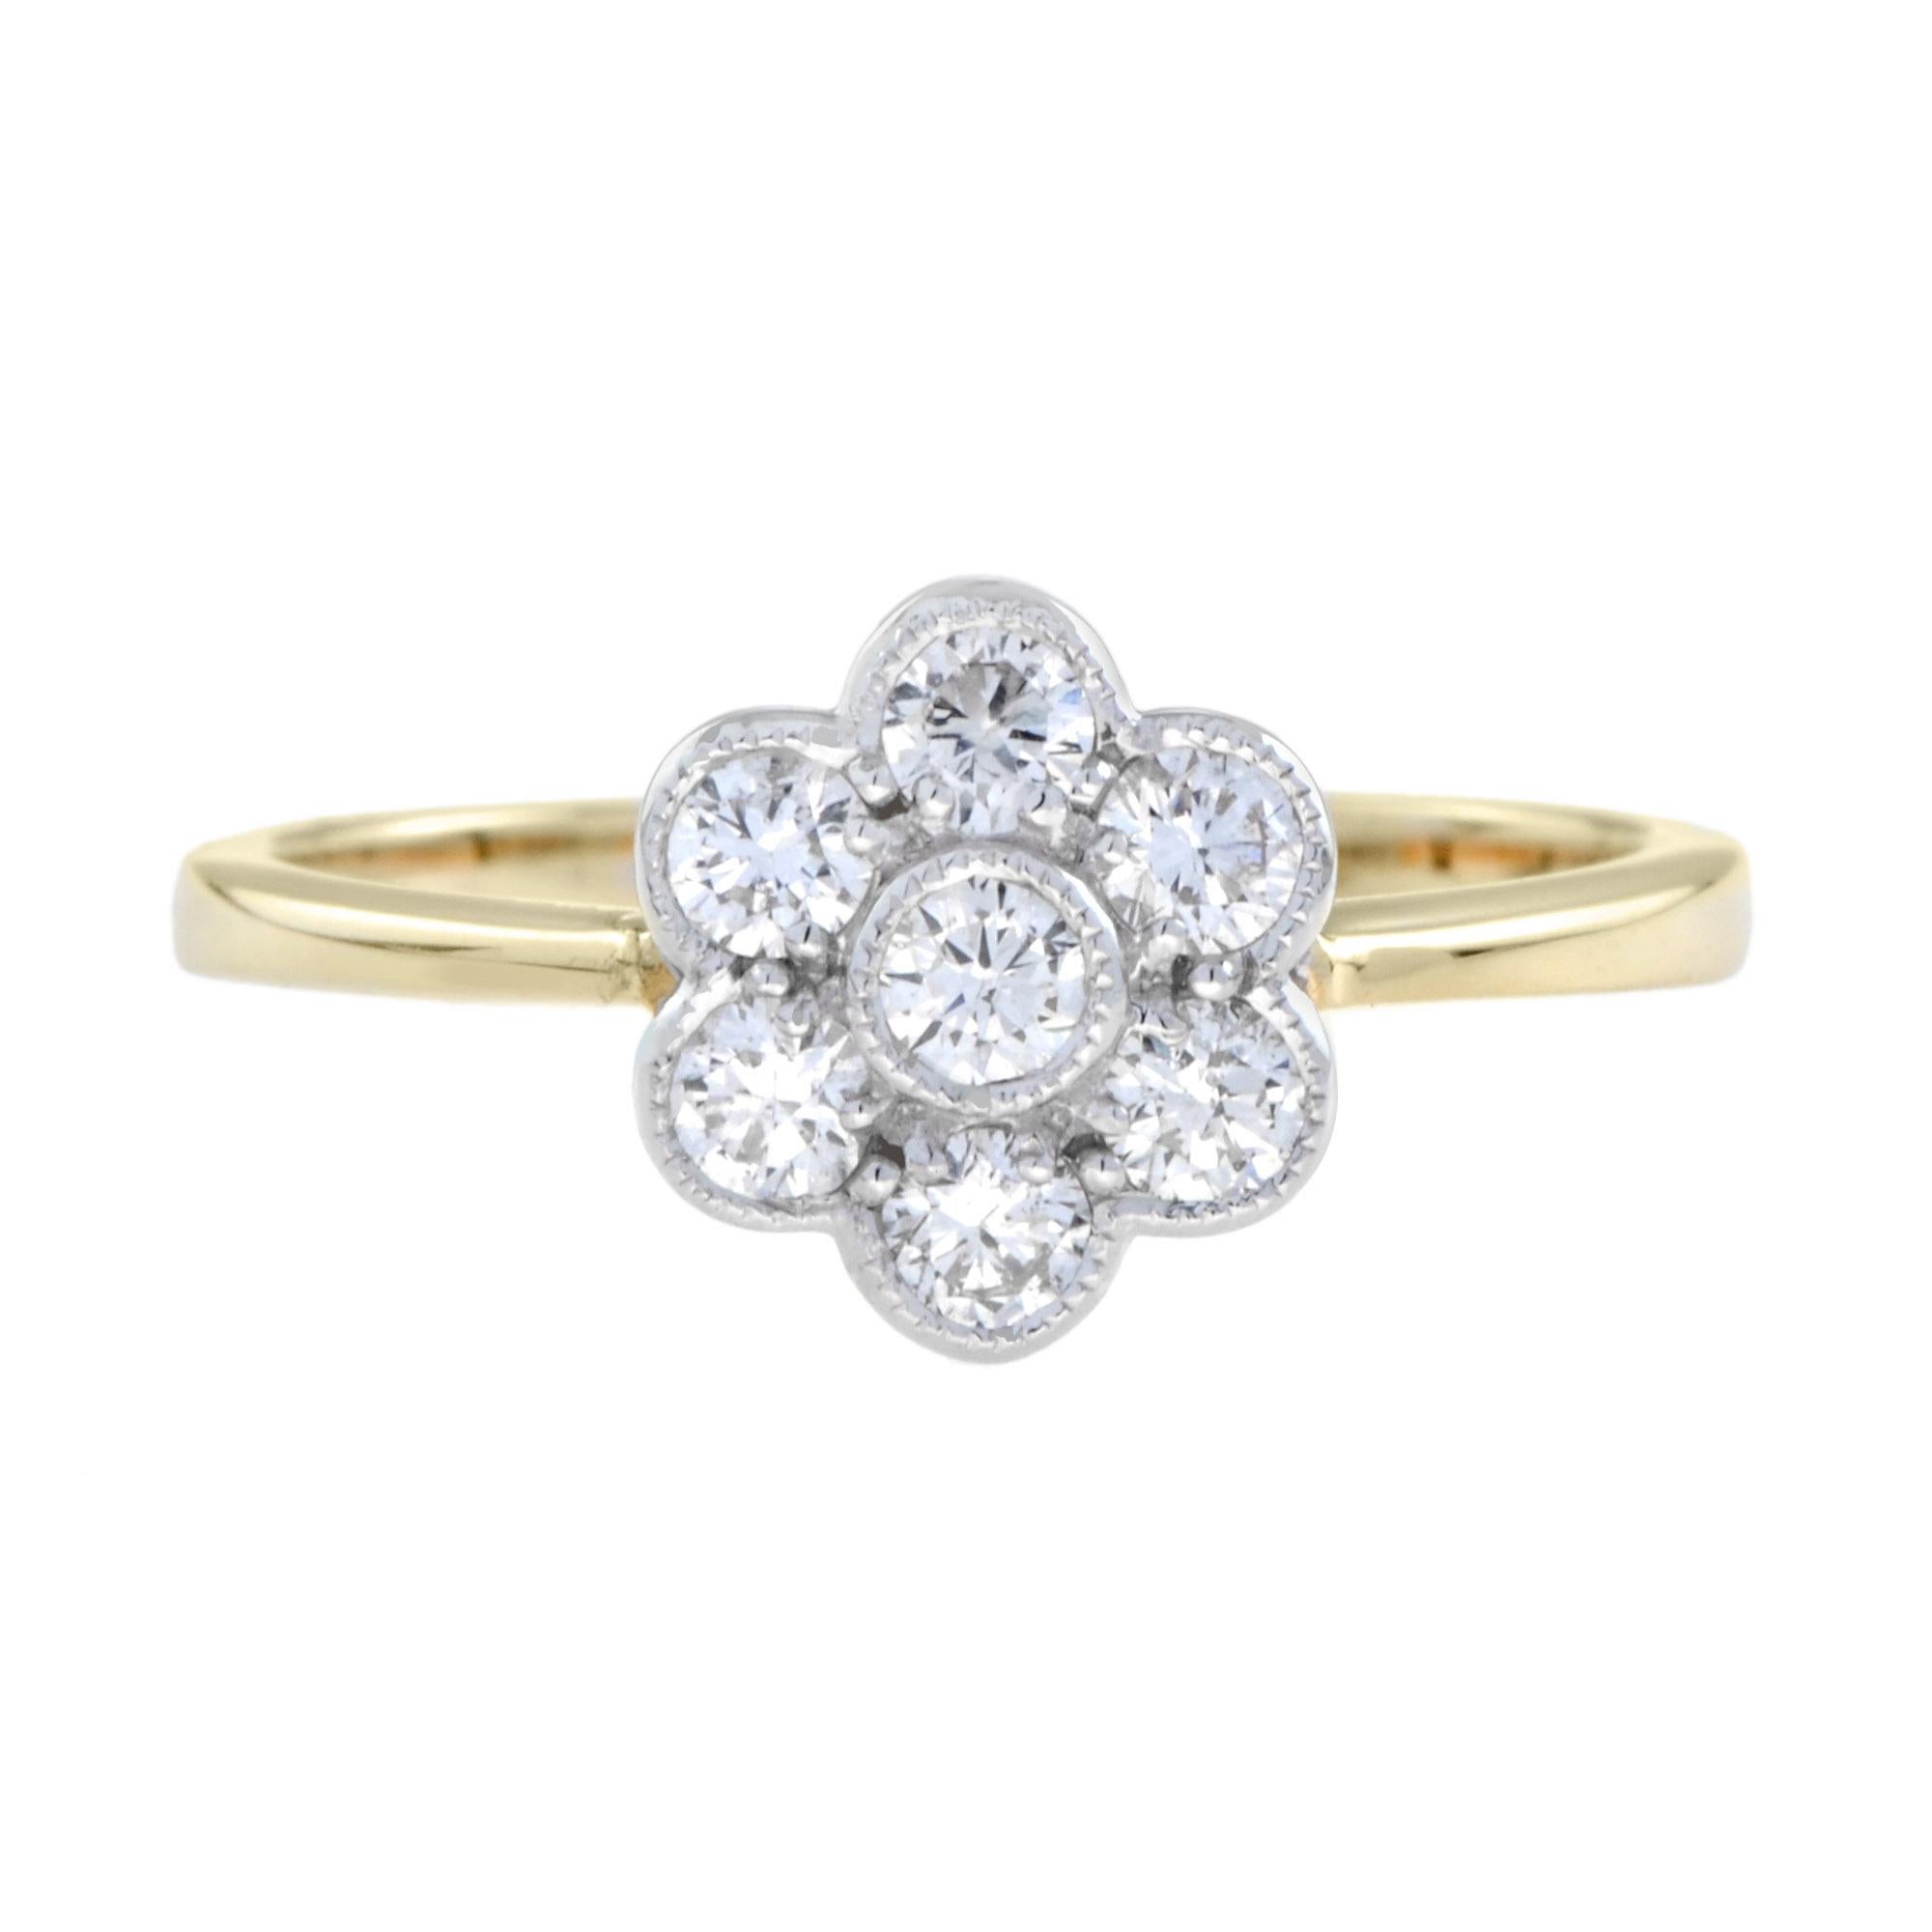 A stunning and beautiful design of the iconic Art Deco flower ring and earrings set, featuring round cut and striking diamonds beautifully set into white top yellow edge.

Ring Information
Style: Art Deco
Metal: 14K White Top Yellow Gold
Weight: